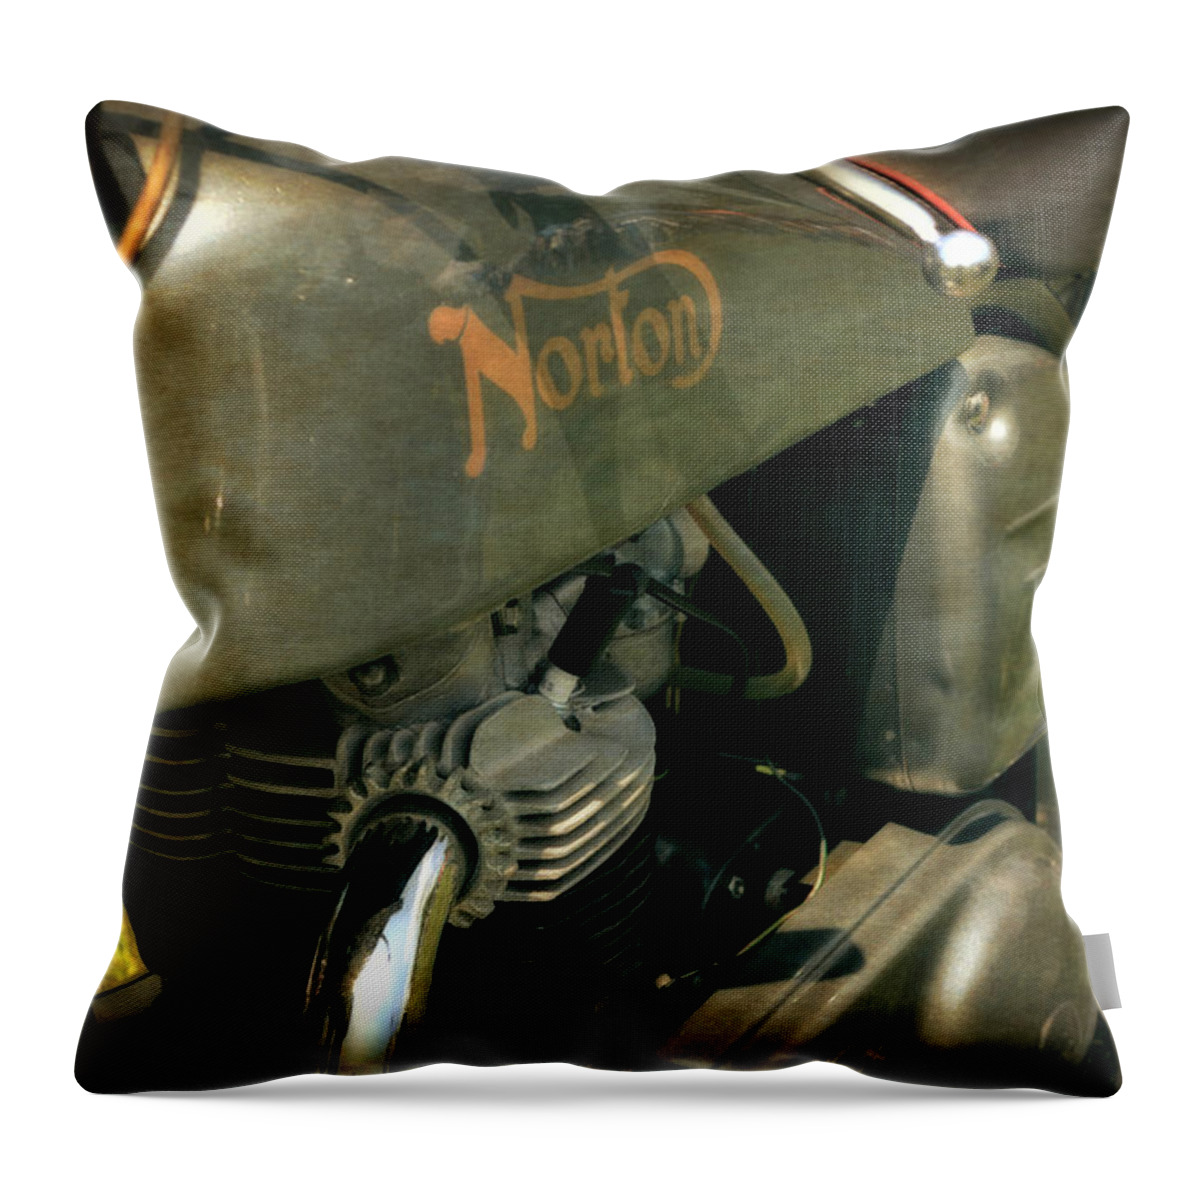 Power Throw Pillow featuring the photograph 1958 Norton Dominator Detail by Michelle Calkins